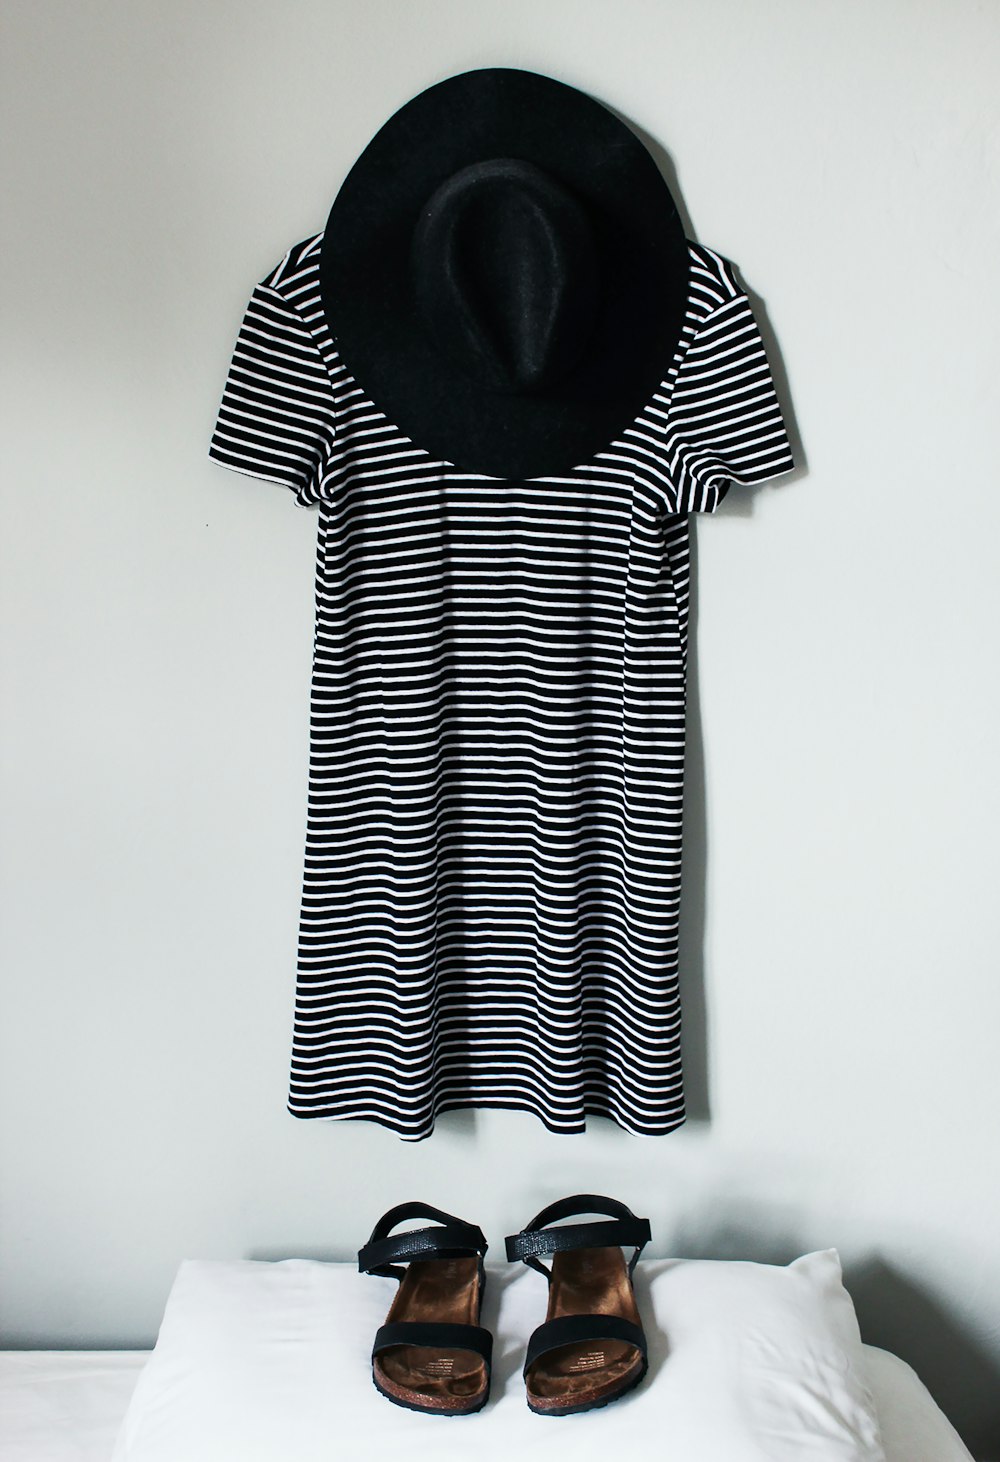 whit and black striped shirt hanging on white wall